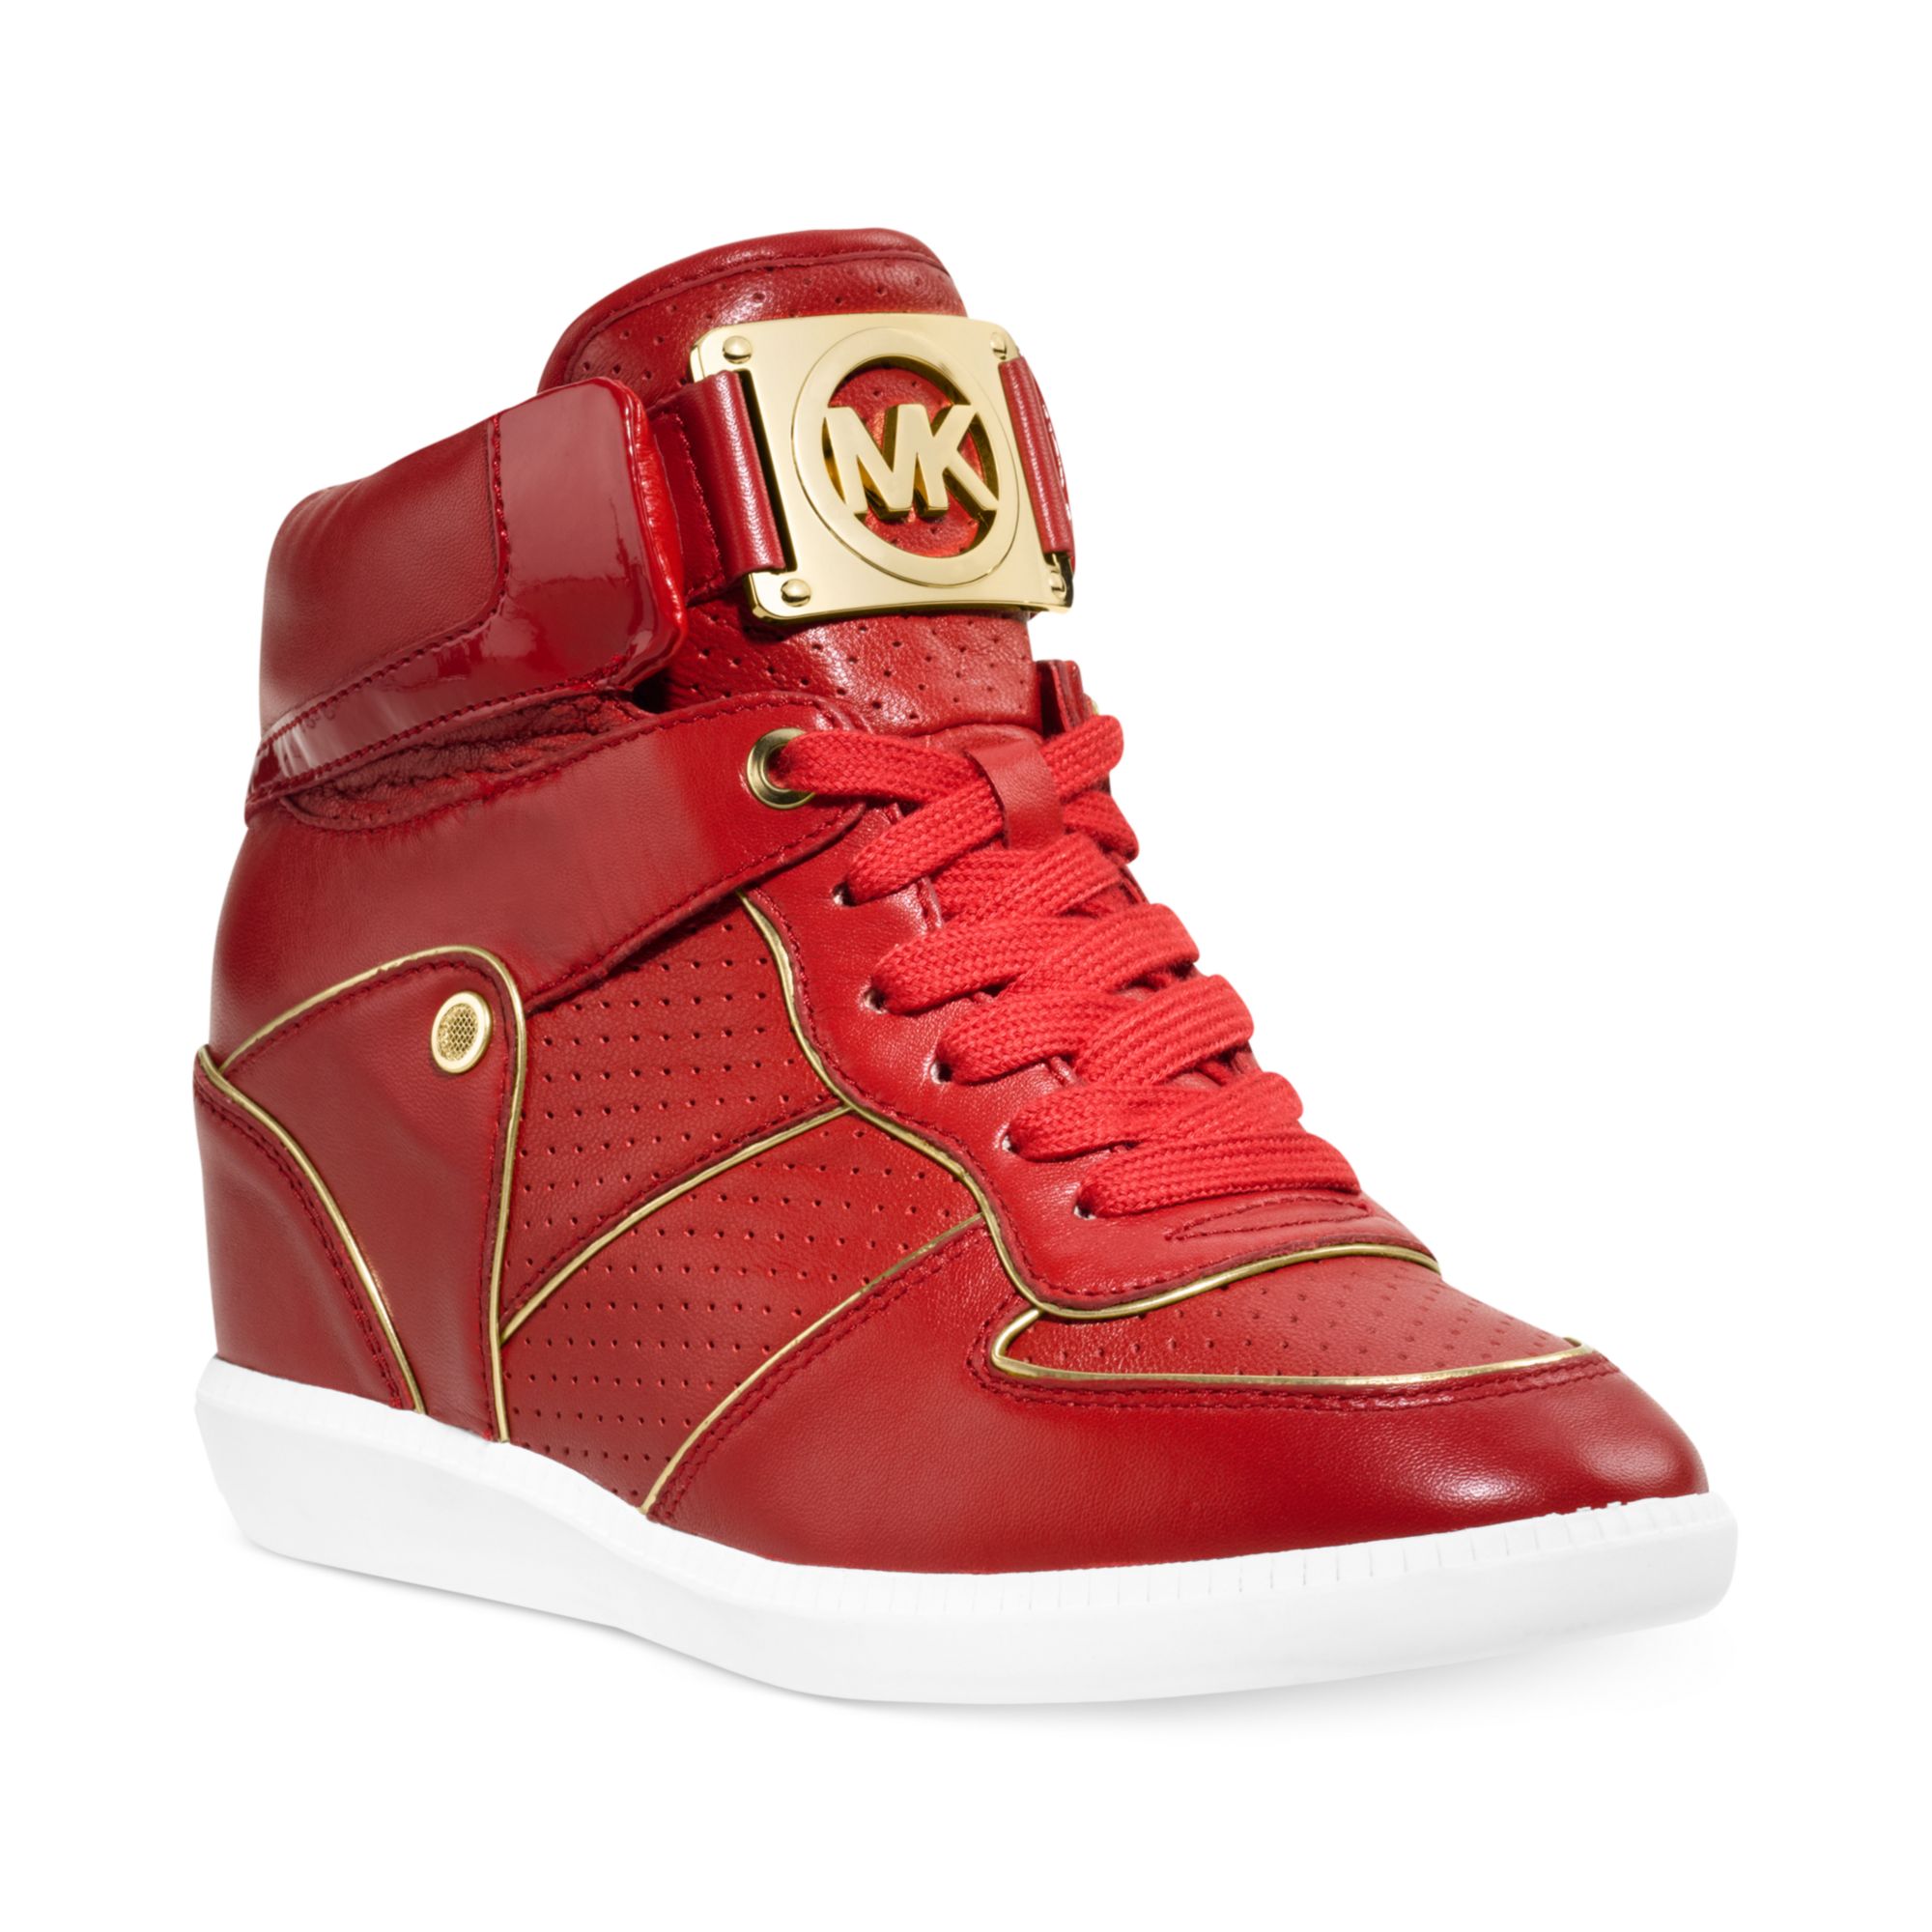 Michael Kors Nikki High Top Logo Sneakers in Red (Red Leather) | Lyst